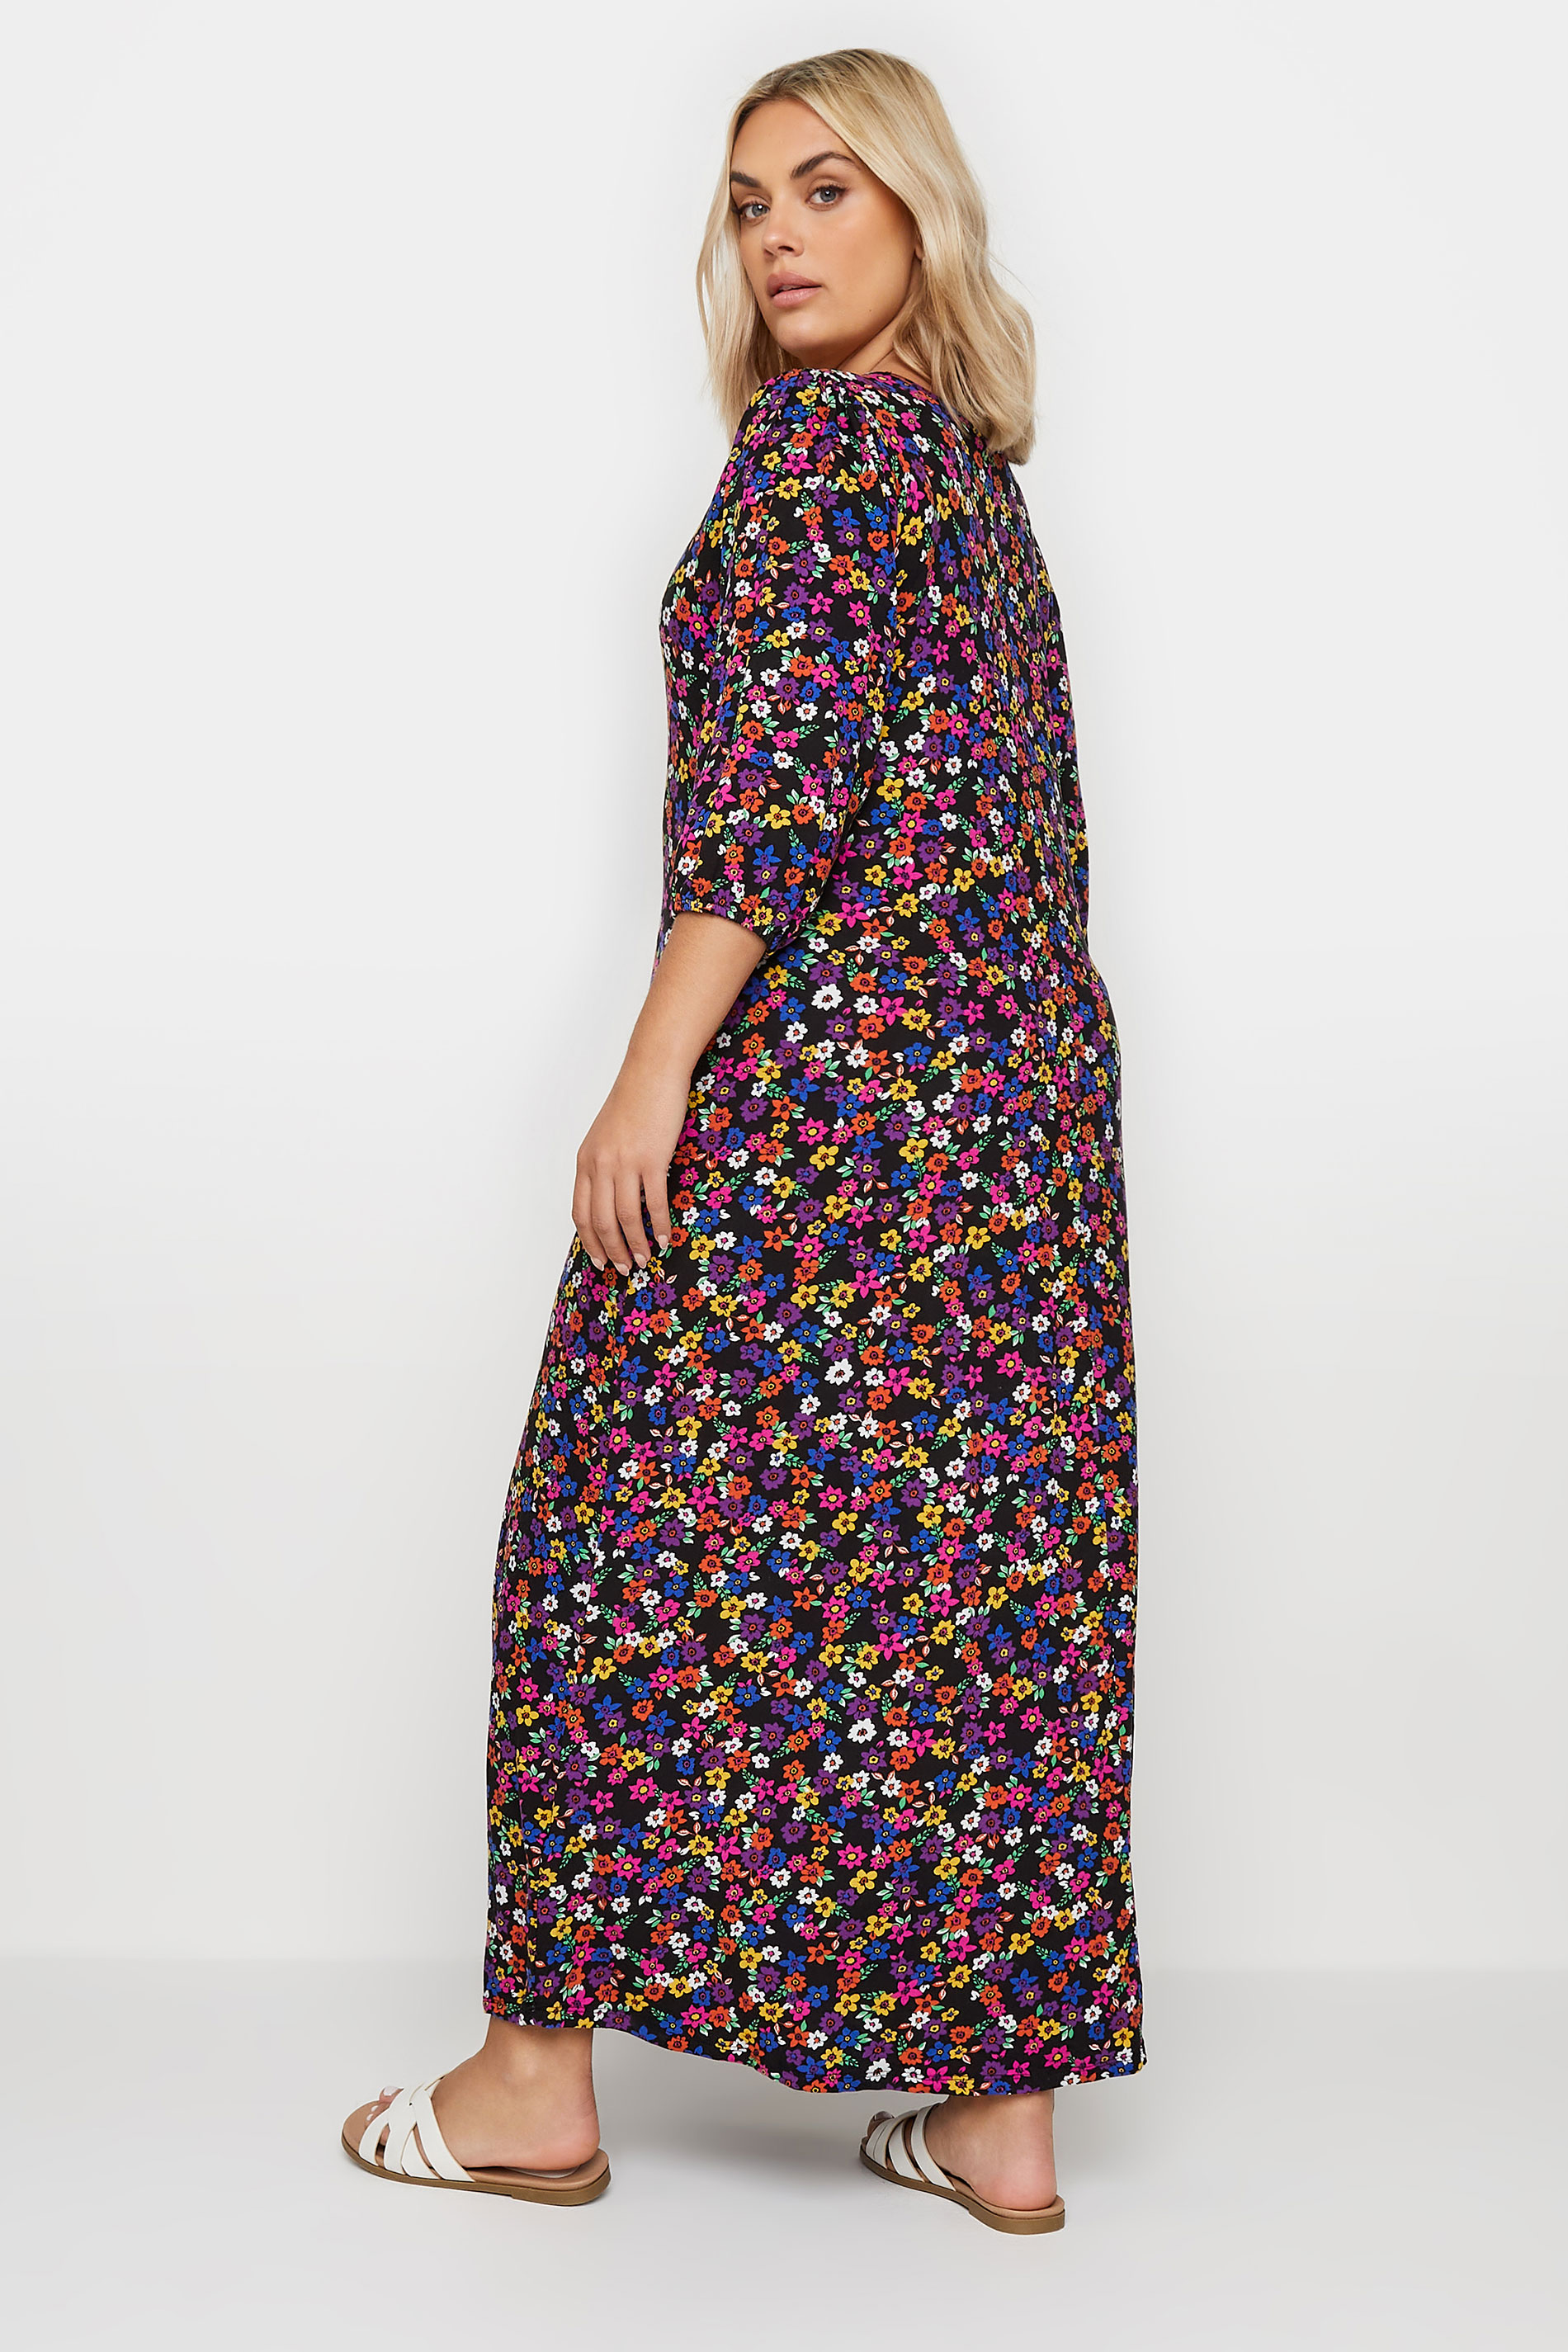 YOURS Plus Size Black Floral Print Swing Maxi Dress | Yours Clothing 3